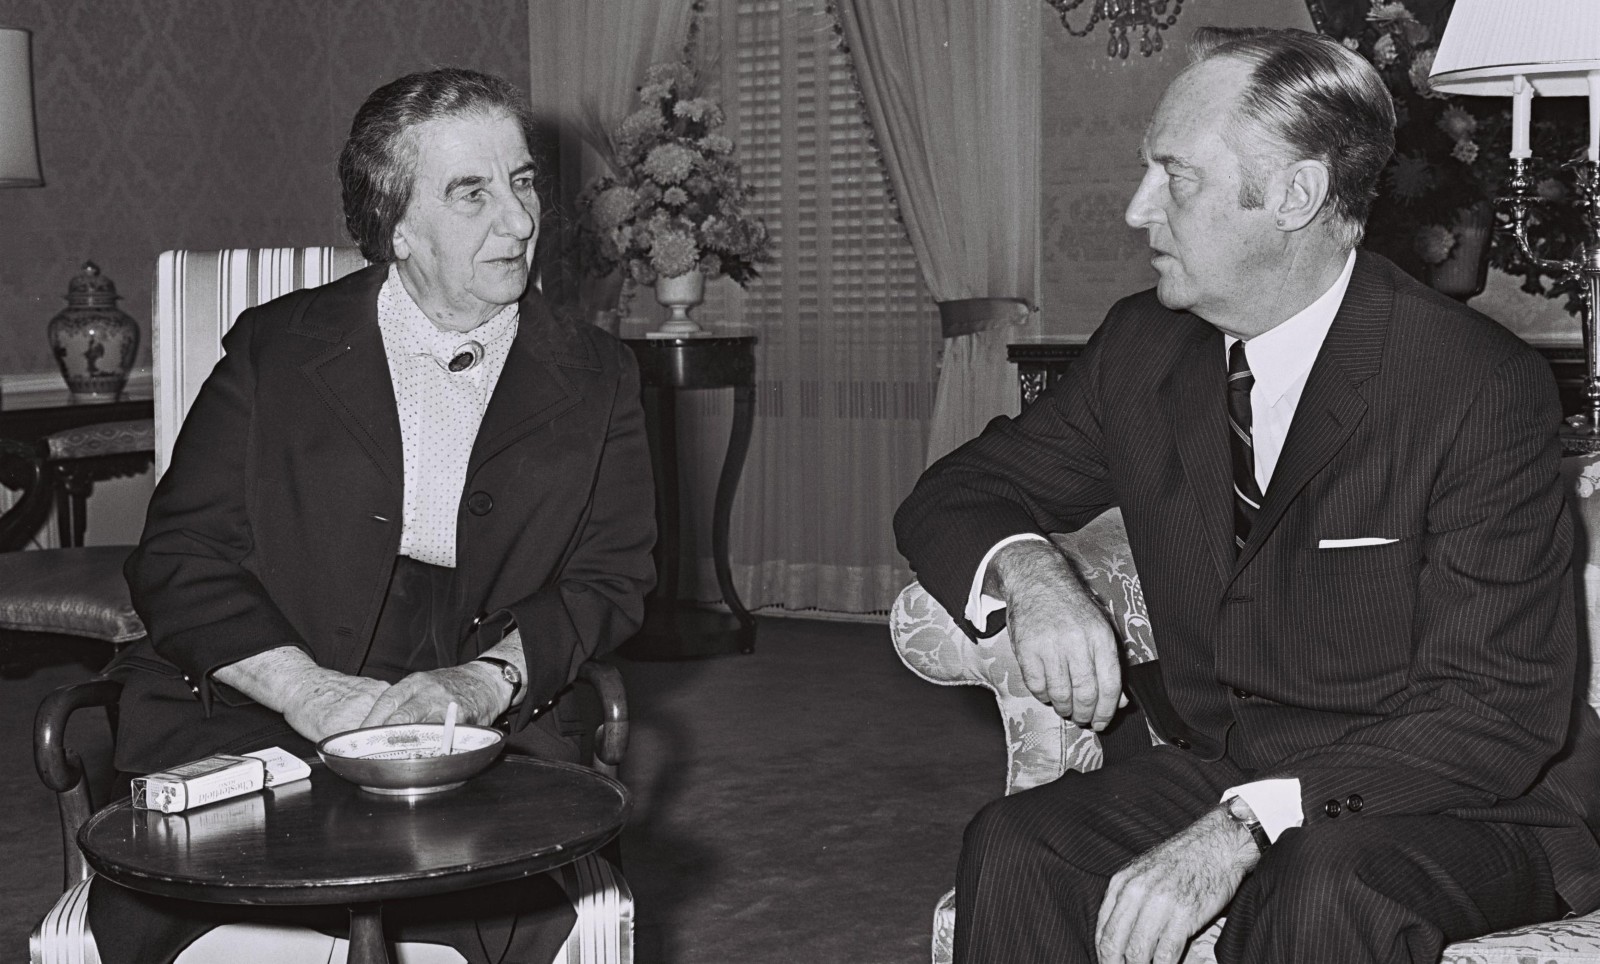 US Secretary of State William Rogers calling on Prime Minister Golda Meir at the Waldorf Astoria hotel in New York, September 29, 1969. Photo by Moshe Milner/GPO